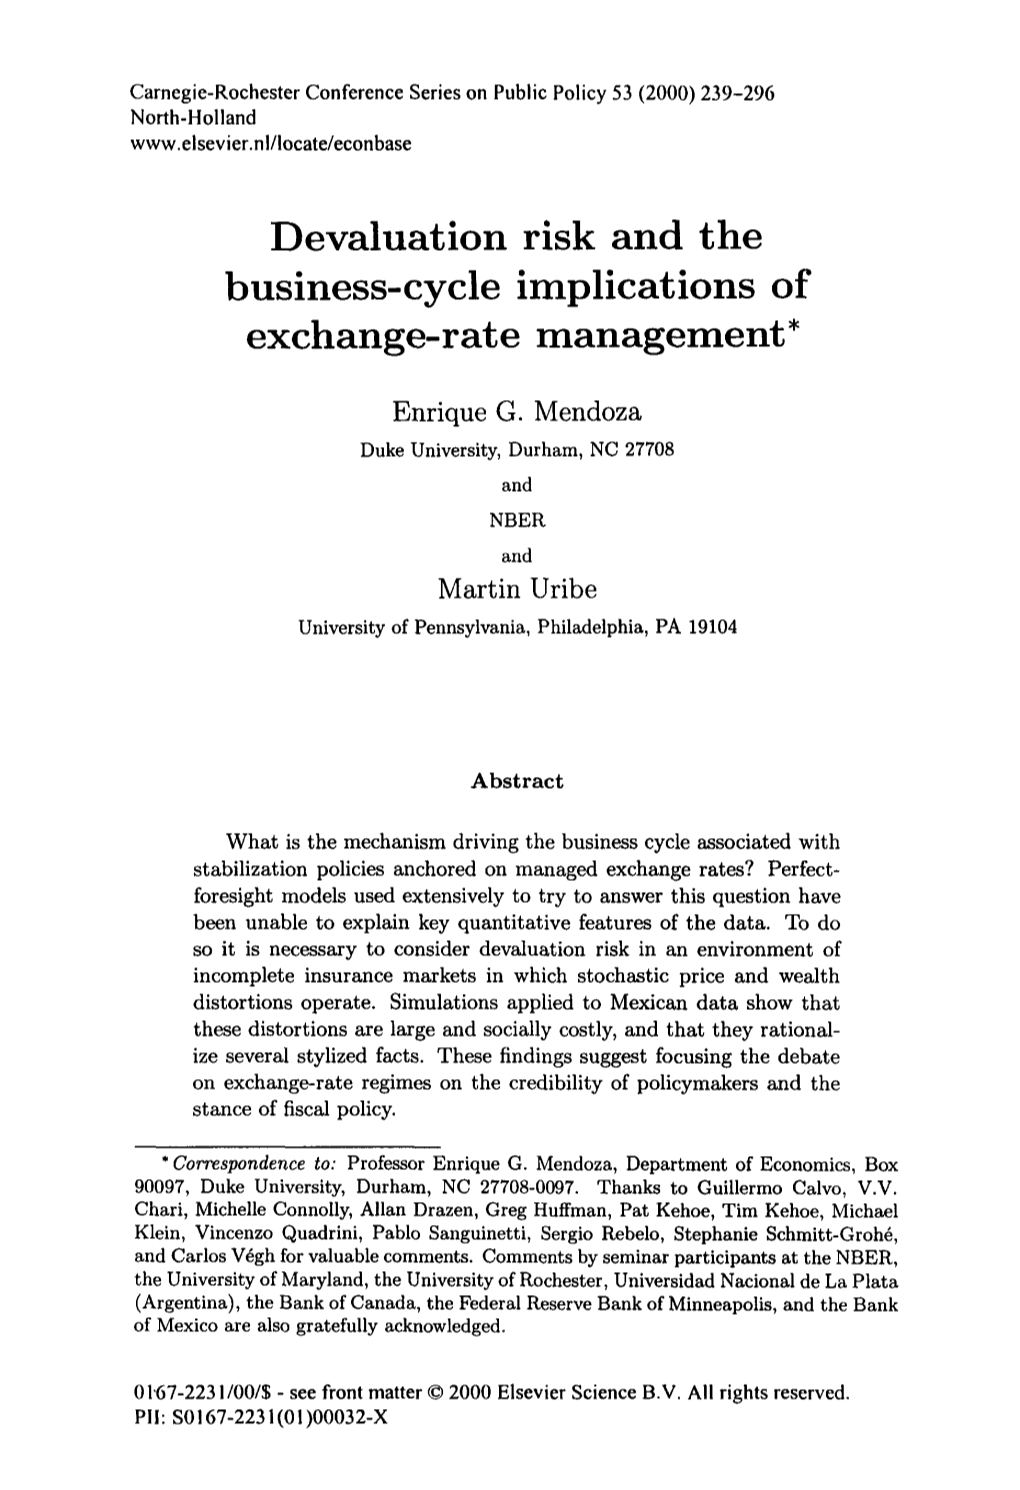 Devaluation Risk and the Business-Cycle Implications of Exchange-Rate Management*